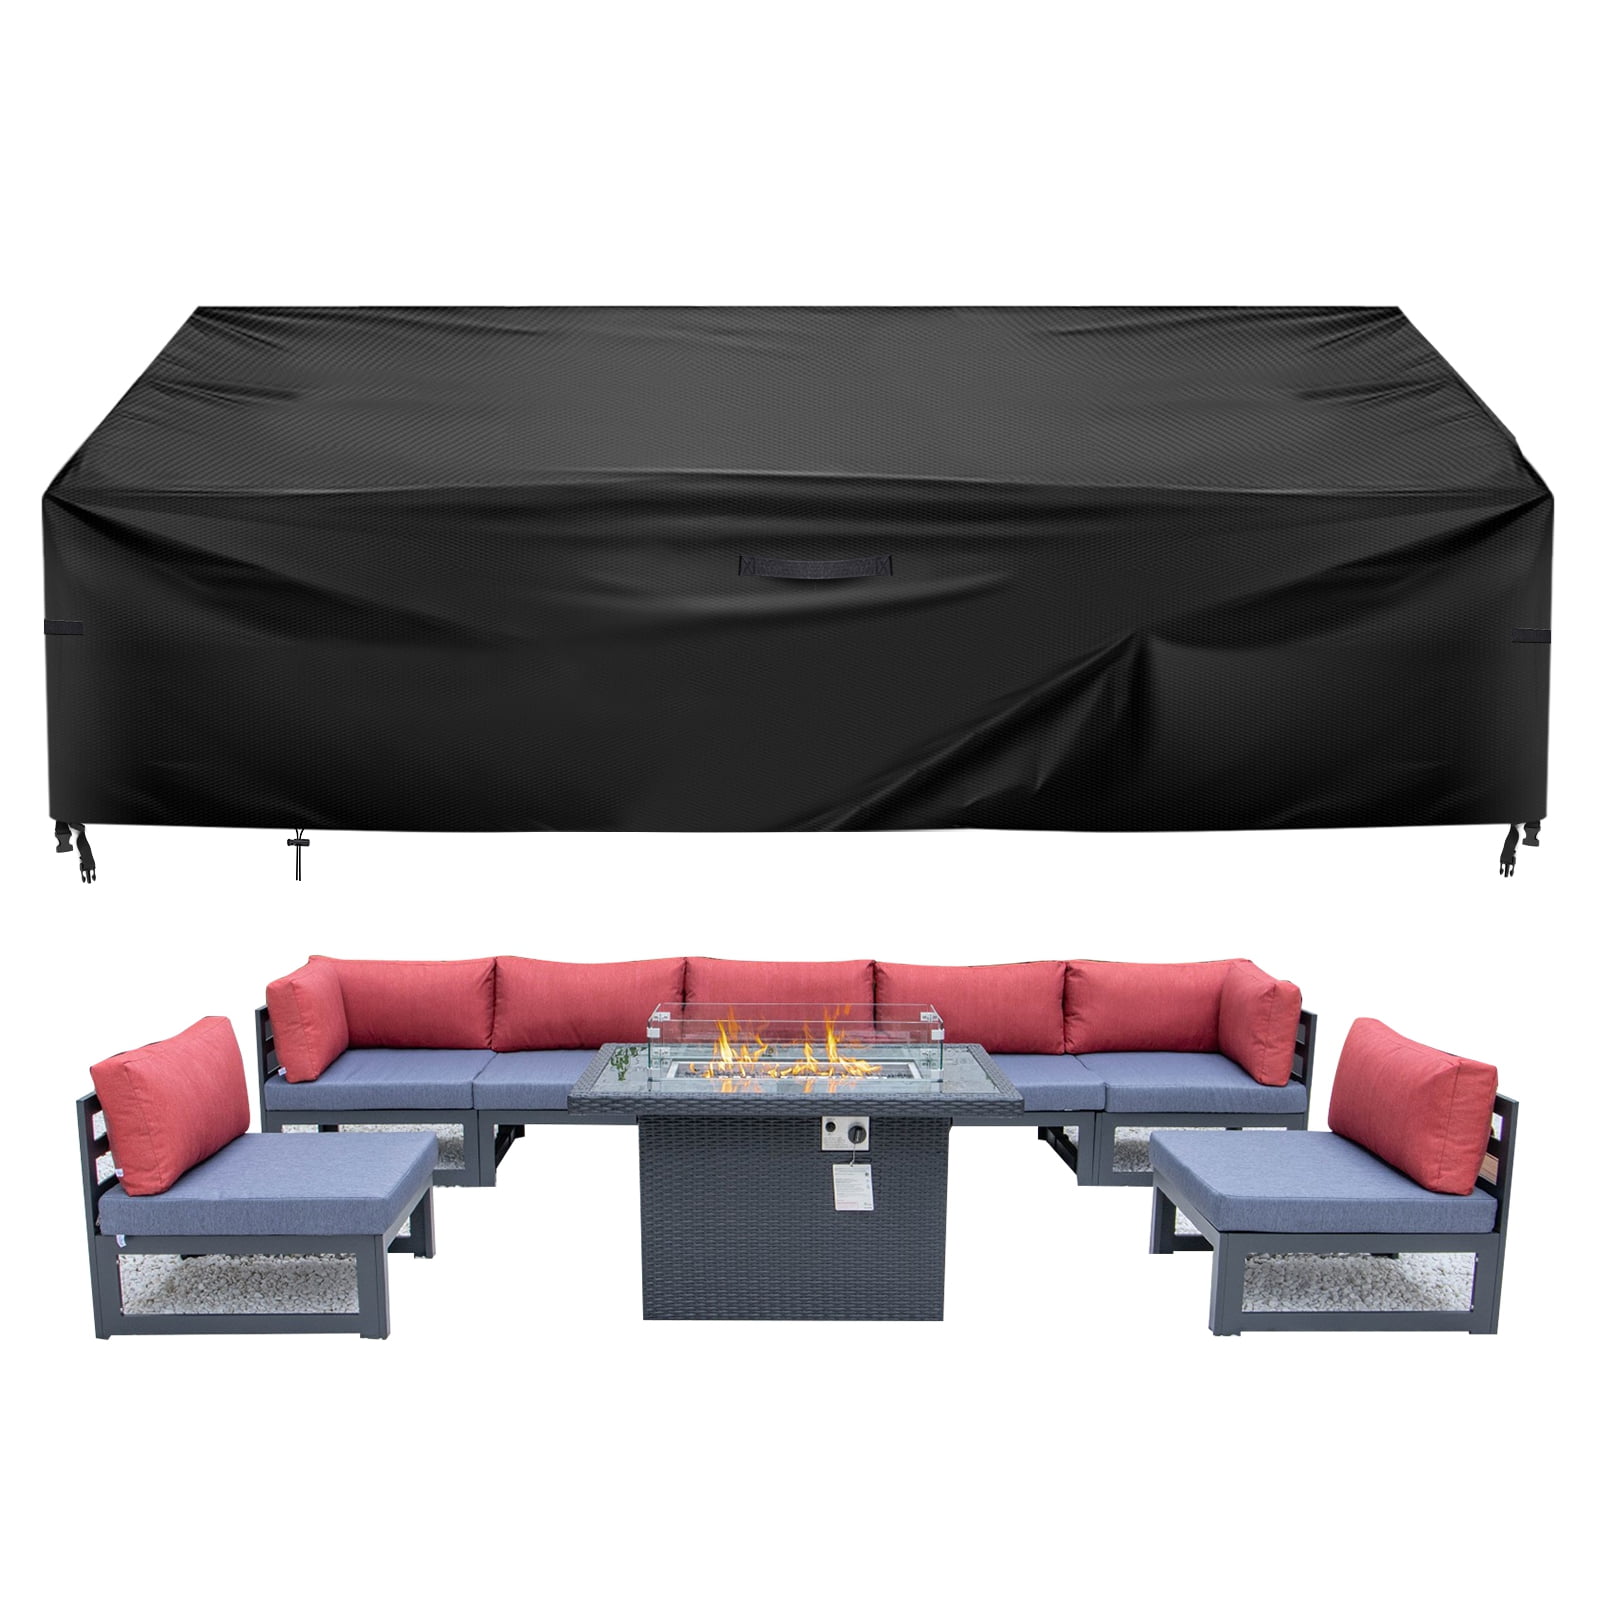 Waterproof Garden Patio Outdoor Furniture Covers Sofa Couch Chair Table Cover 